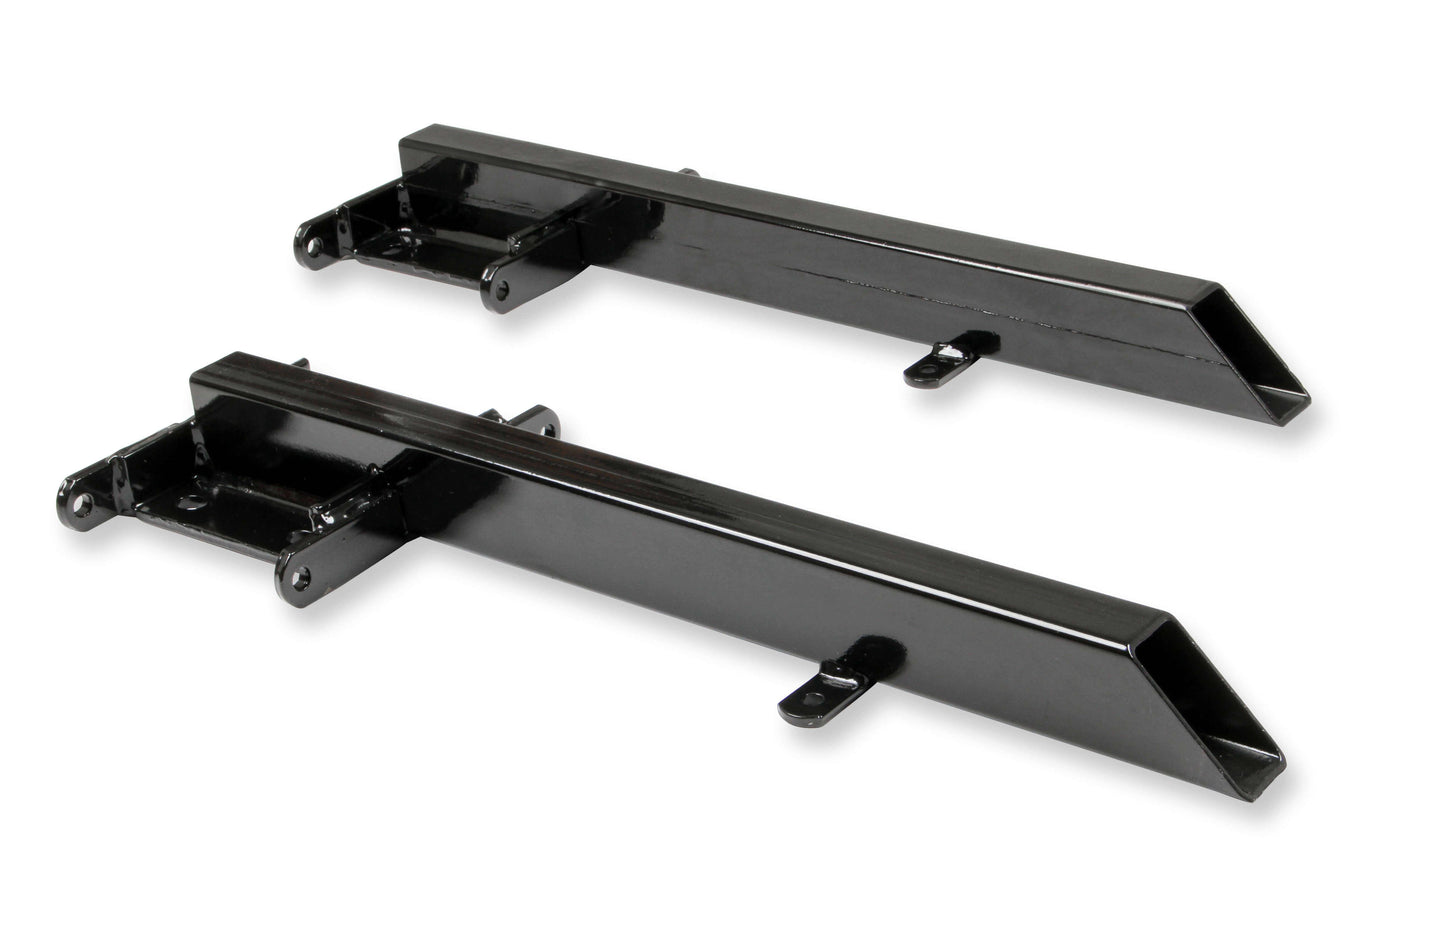 Lakewood 21606 Traction Bars, GM F/X Body, Street and Strip